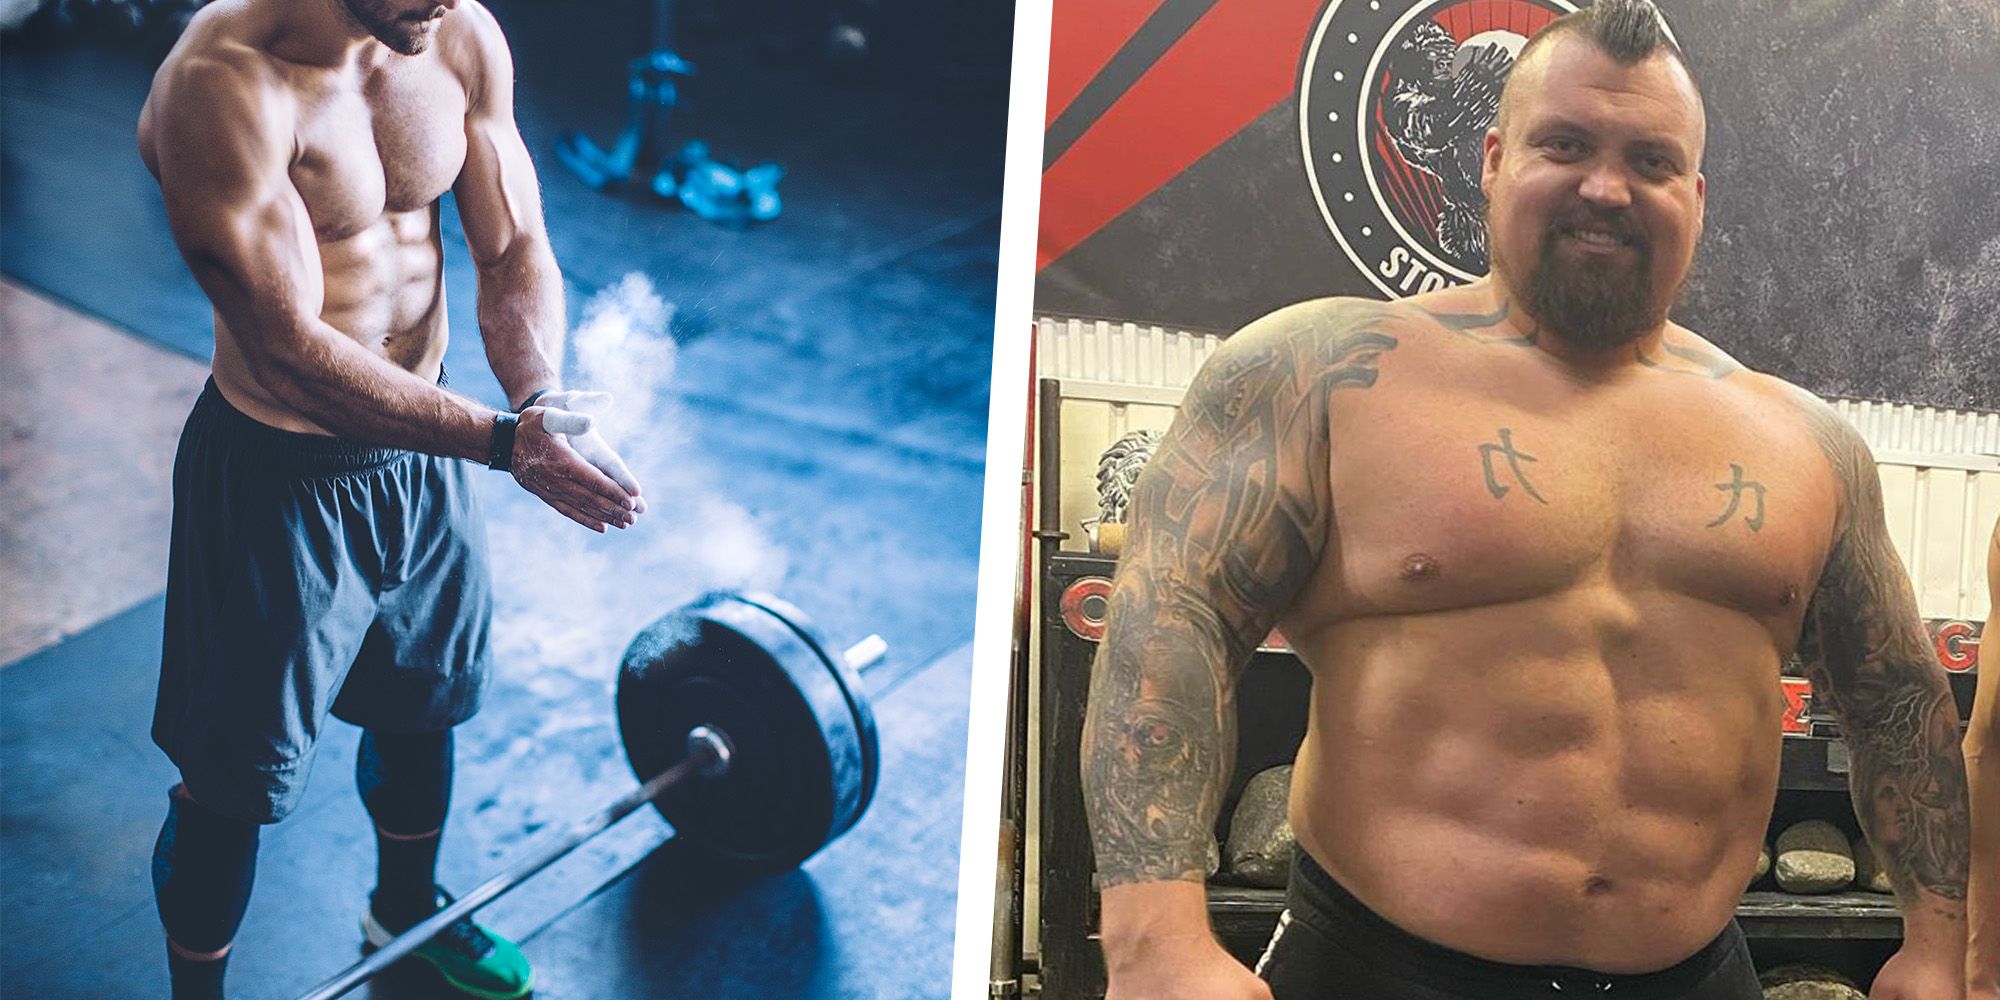 How to add weight to your deadlift wsm eddie hall explains his workout tips